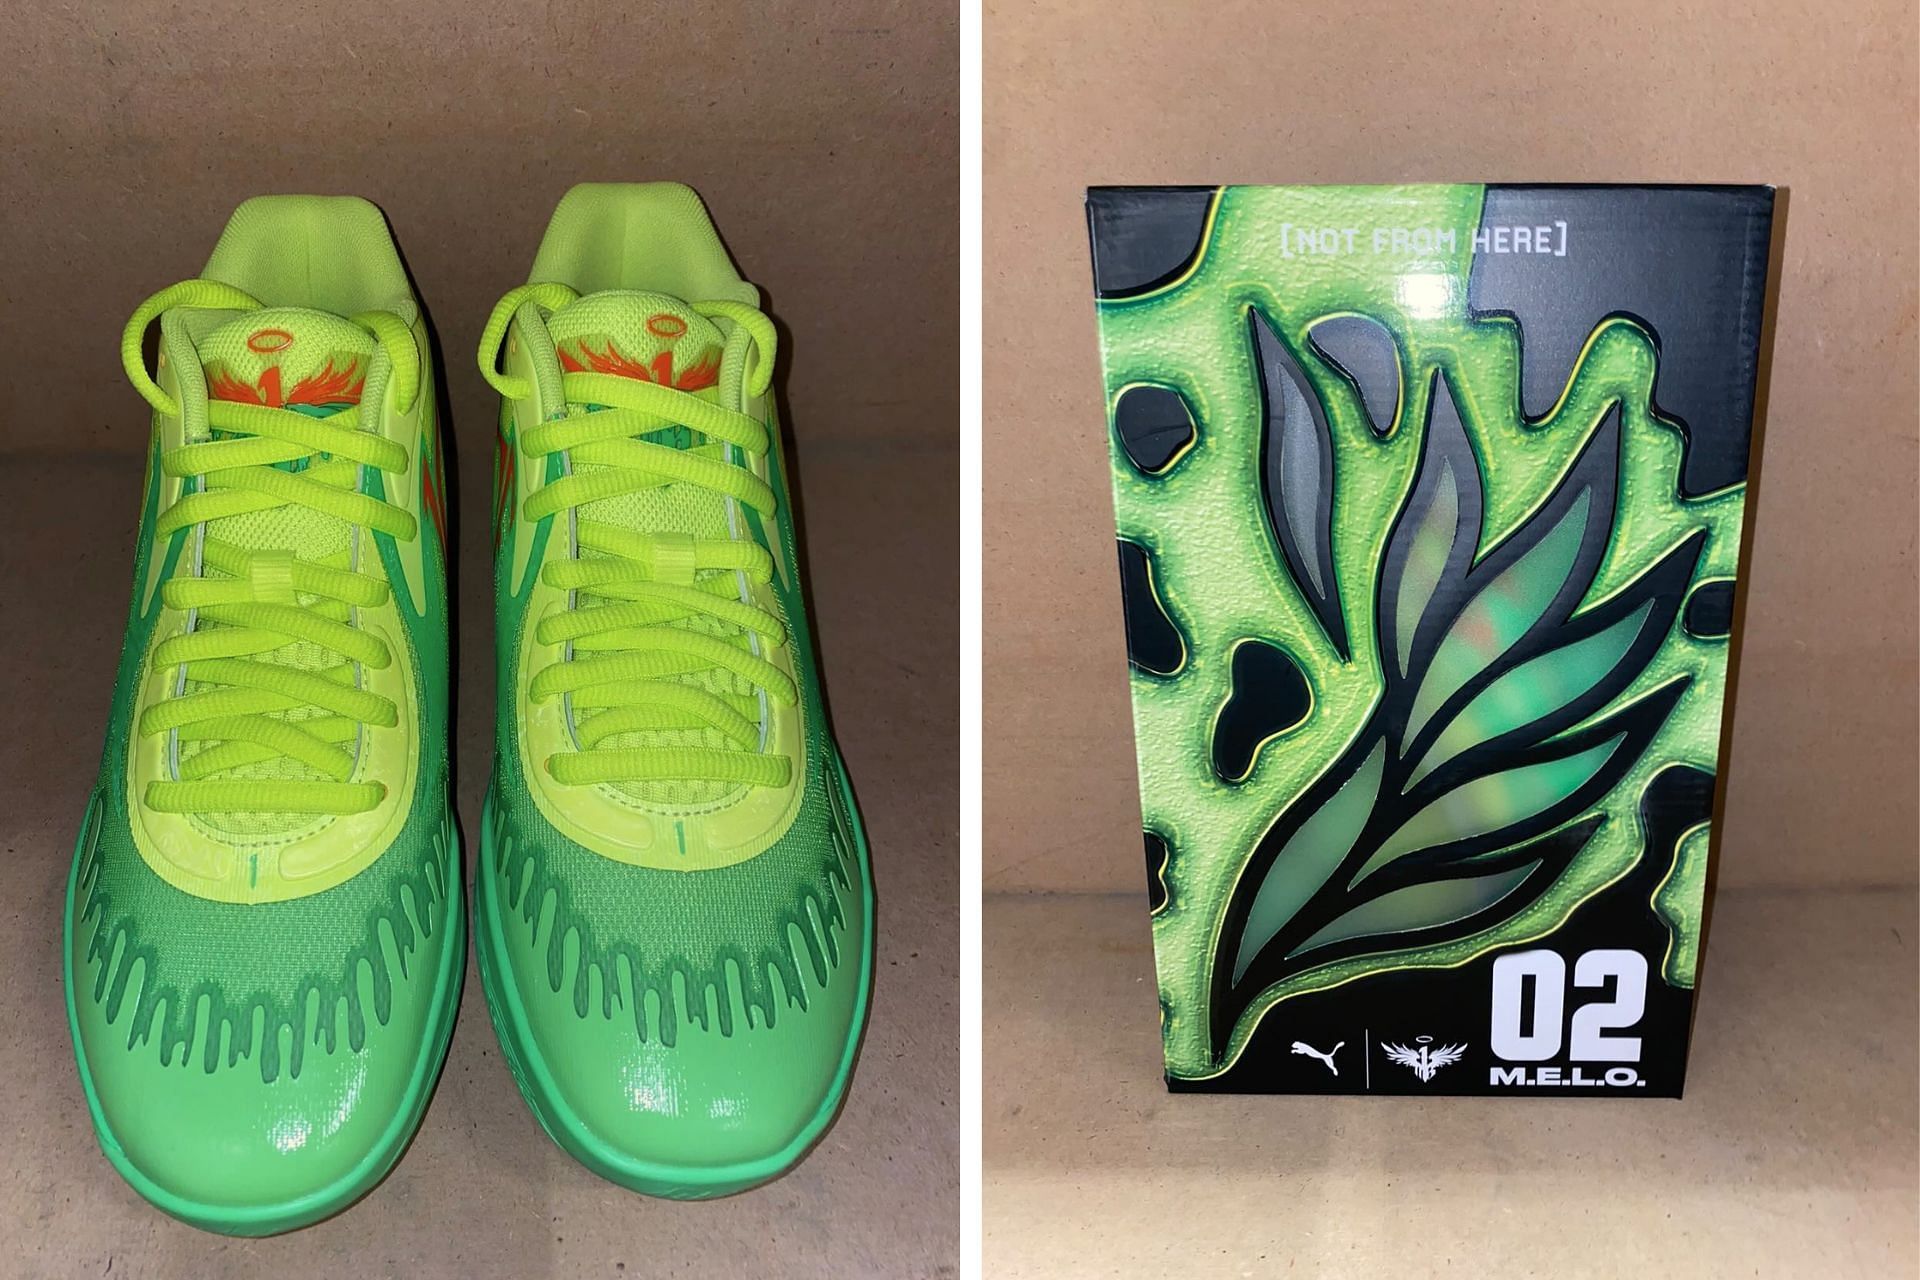 Take a closer look at the shoes and customized shoe box of the upcoming PUMA MB.02 Slime sneaker (Image via